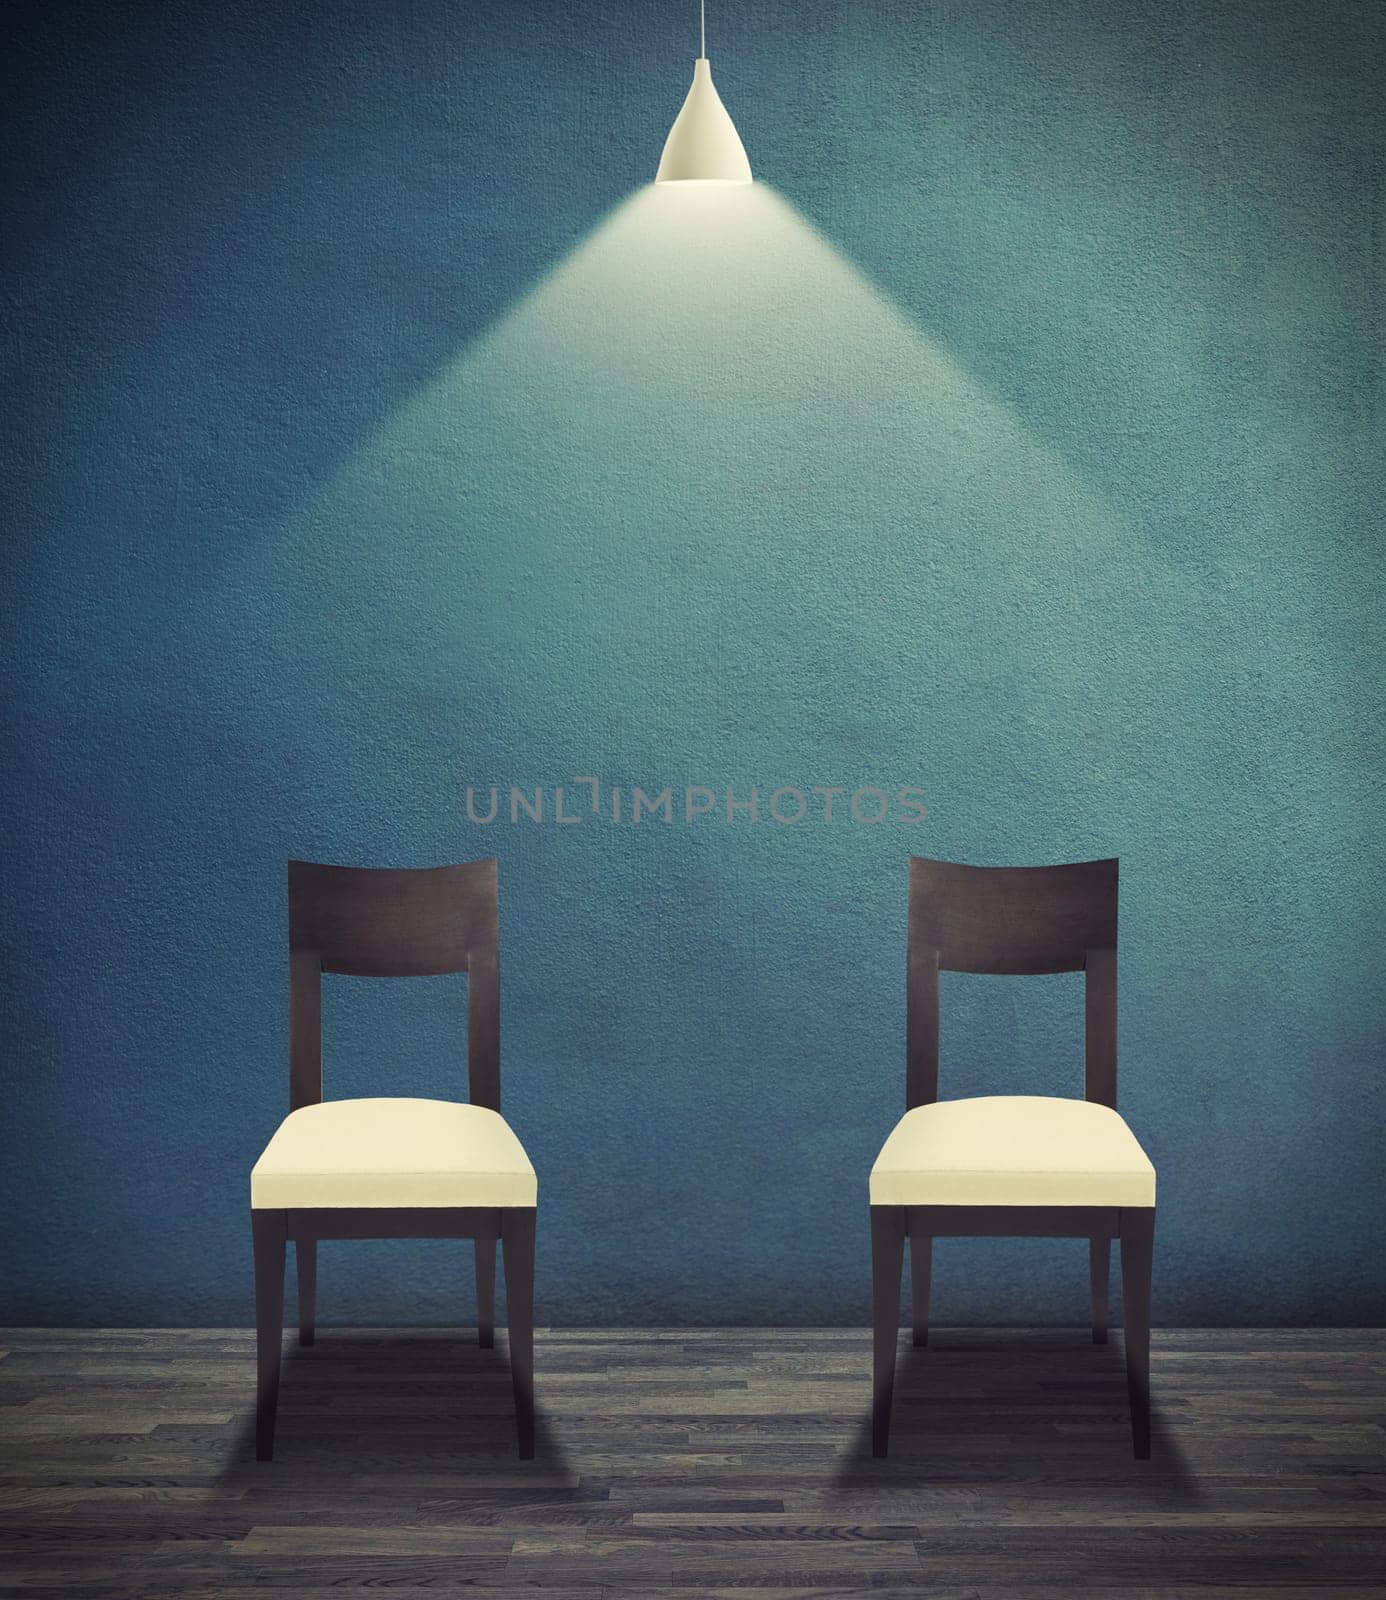 Illustration, empty room and interrogation with light on chair for legal, justice or questions on wall background. Jail, criminal investigation and spotlight art for suspect, defense or punishment by YuriArcurs